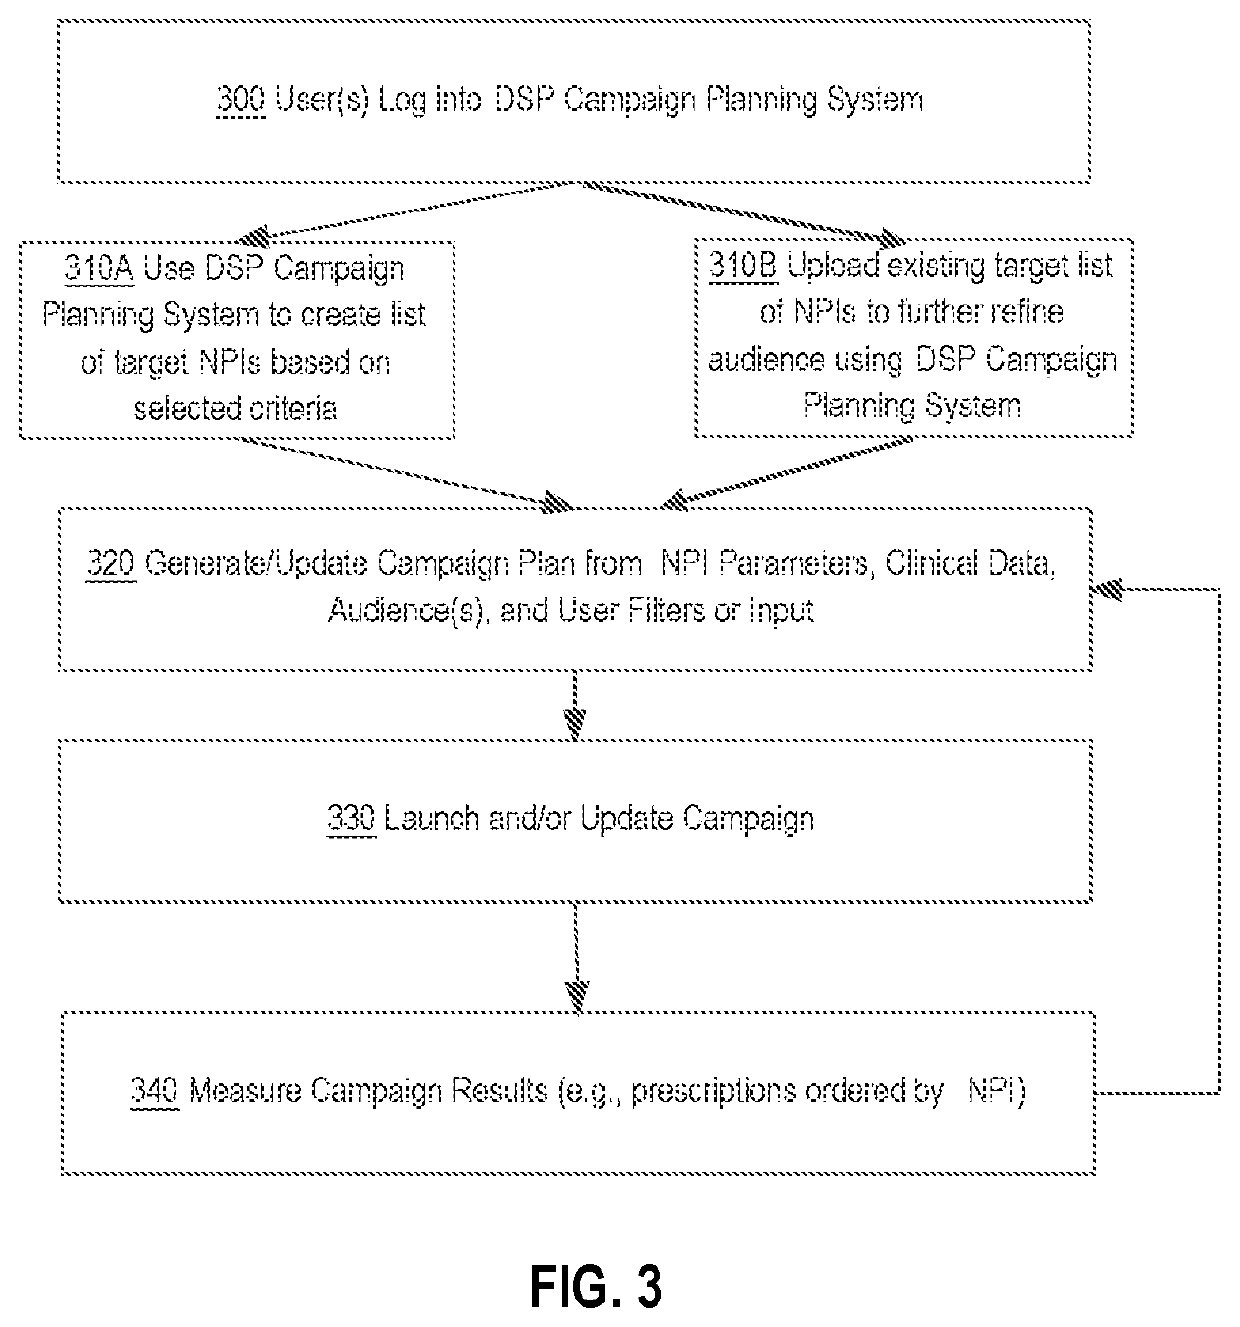 Integrated searching of non-media data and media data in campaign planning